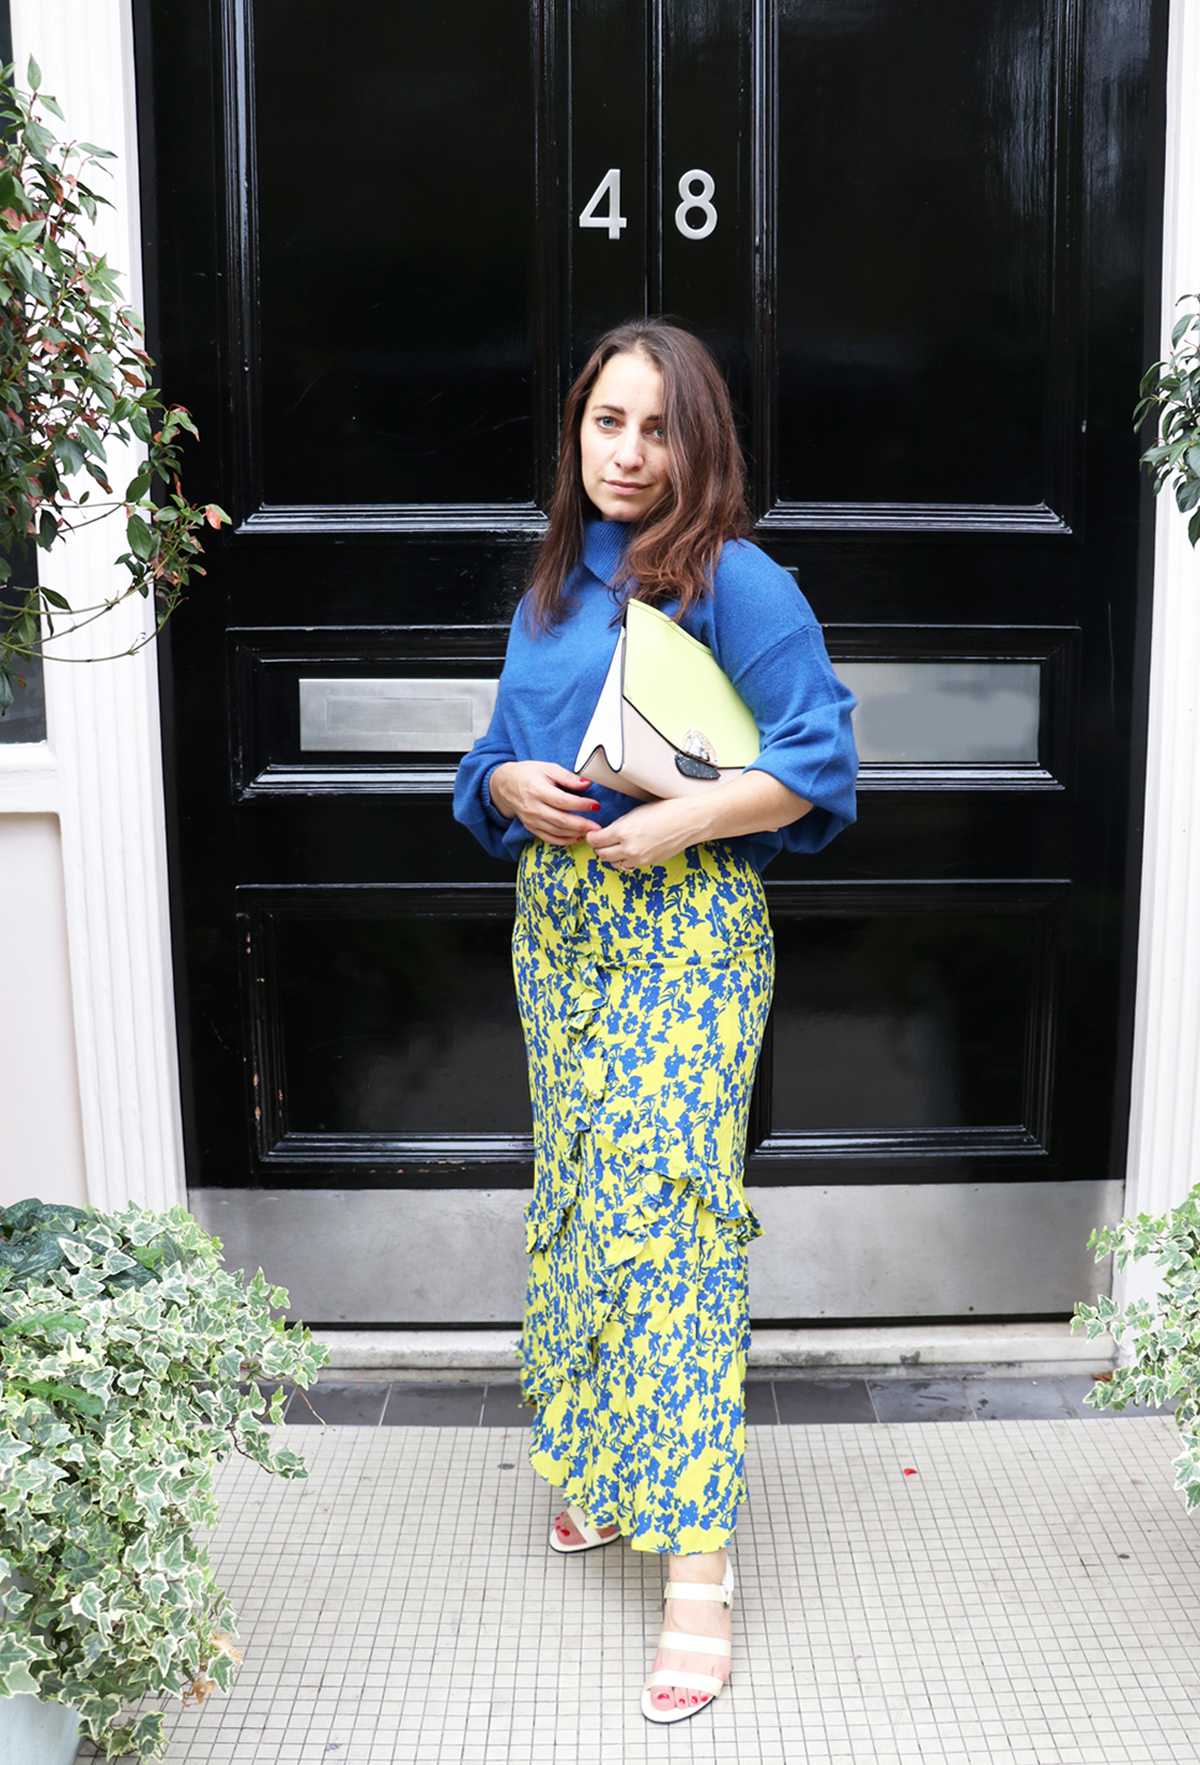 The Outnet autumn outfits: Hannah Almassi